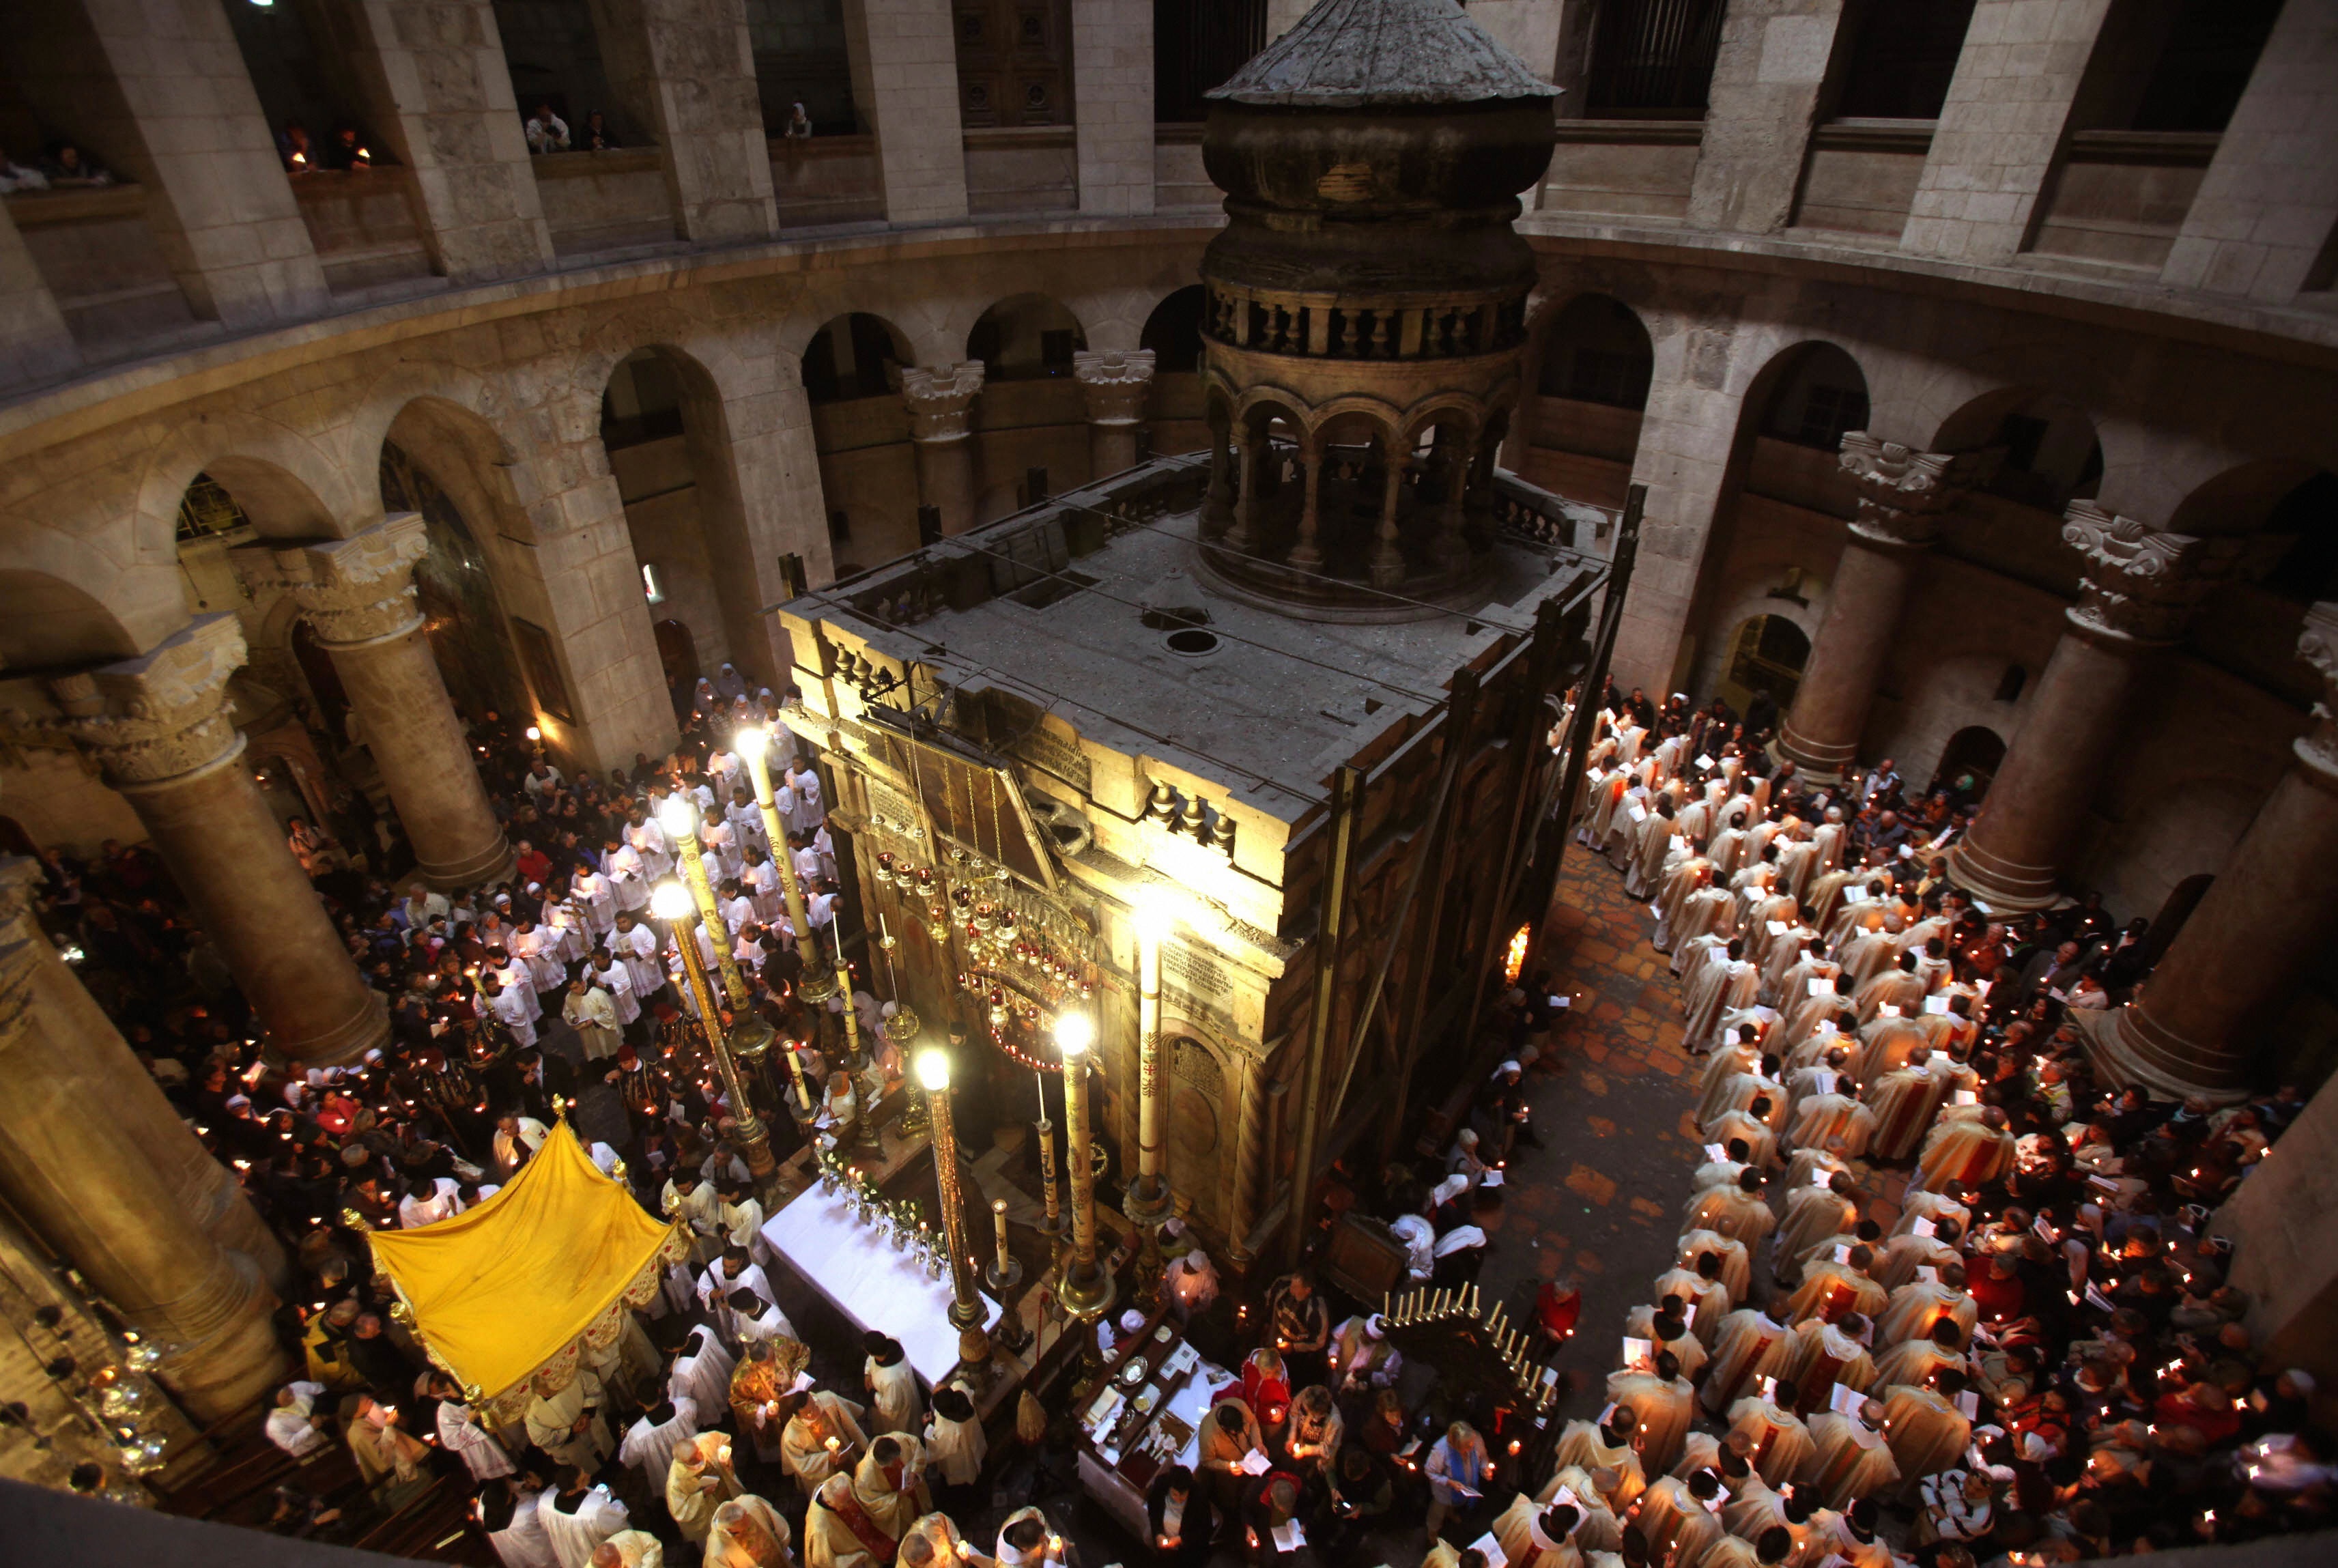 GALI TIBBON/AFP/Getty Images. Roman Catholic clergy men hold candles as they circle the aedicule during the Holy Thursday Easter procession at the Church of the Holy Sepulchre in Jerusalem's Old City on April 09, 2009. Christian believers around the world mark the solemn period of Easter in celebration of the crucifixion and resurrection of Jesus Christ. Christians traditionally believe the church is built on the site where Jesus was crucified and buried.